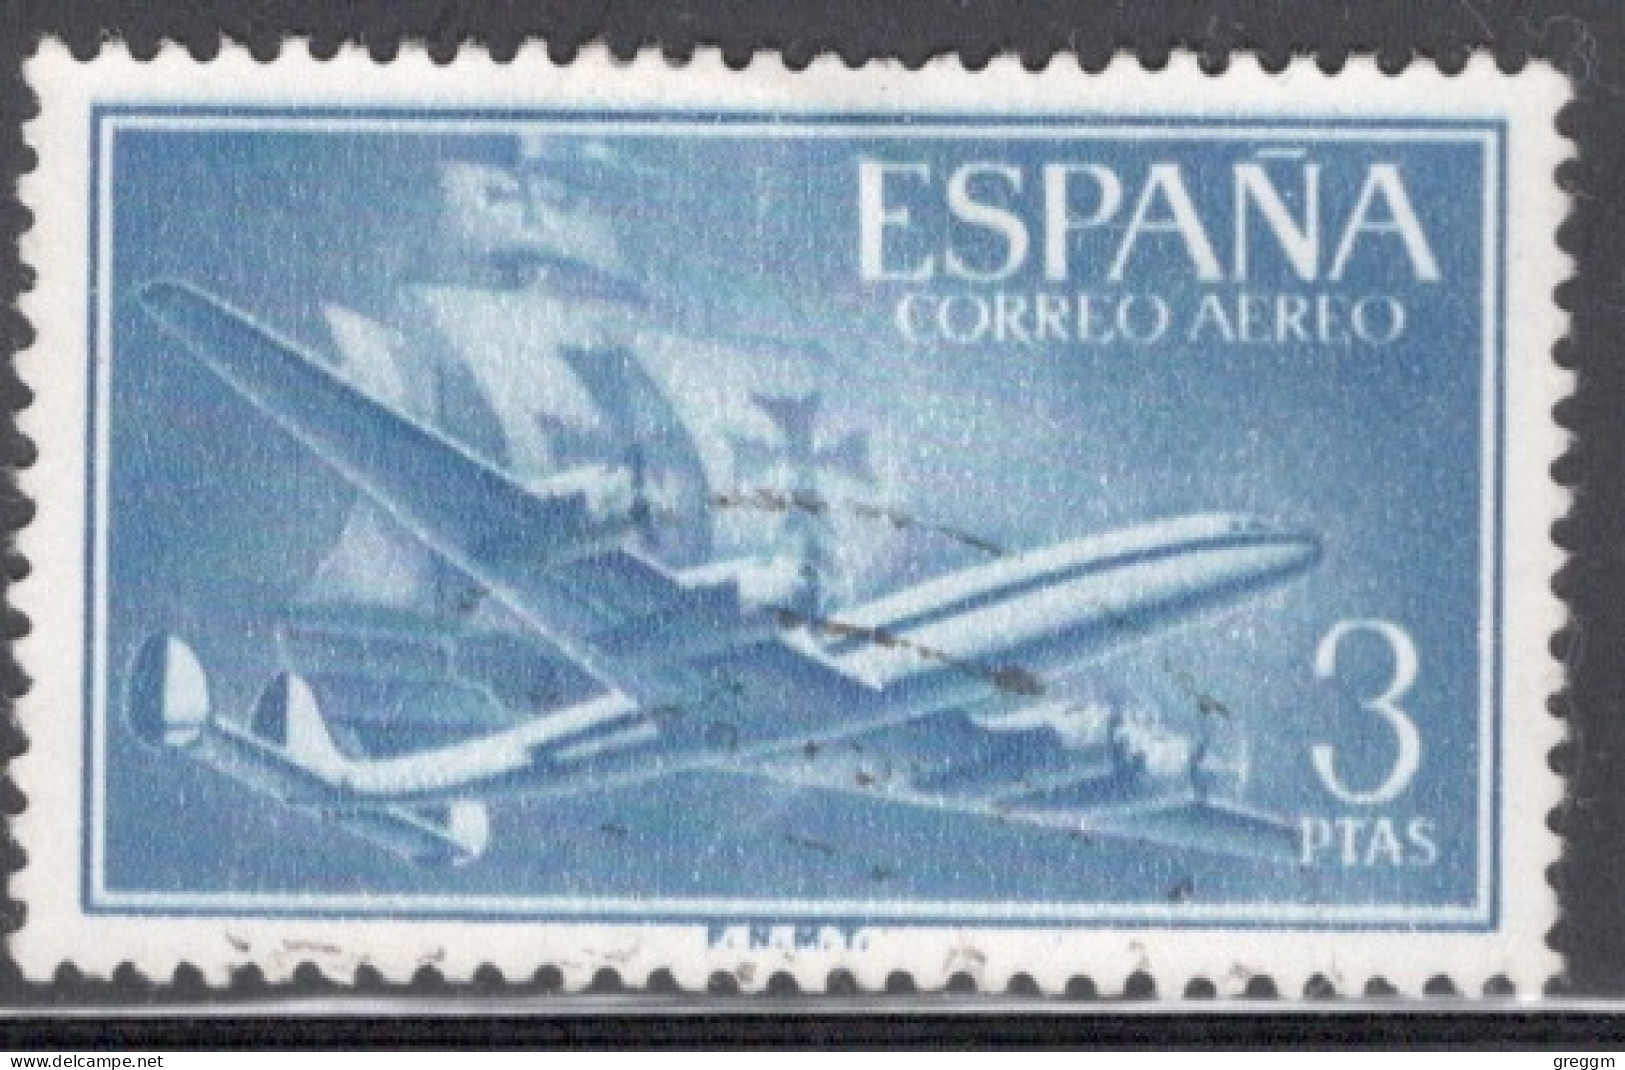 Spain 1955 Single Stamp Issued As An Airmail Definitive In Fine Used. - Gebraucht